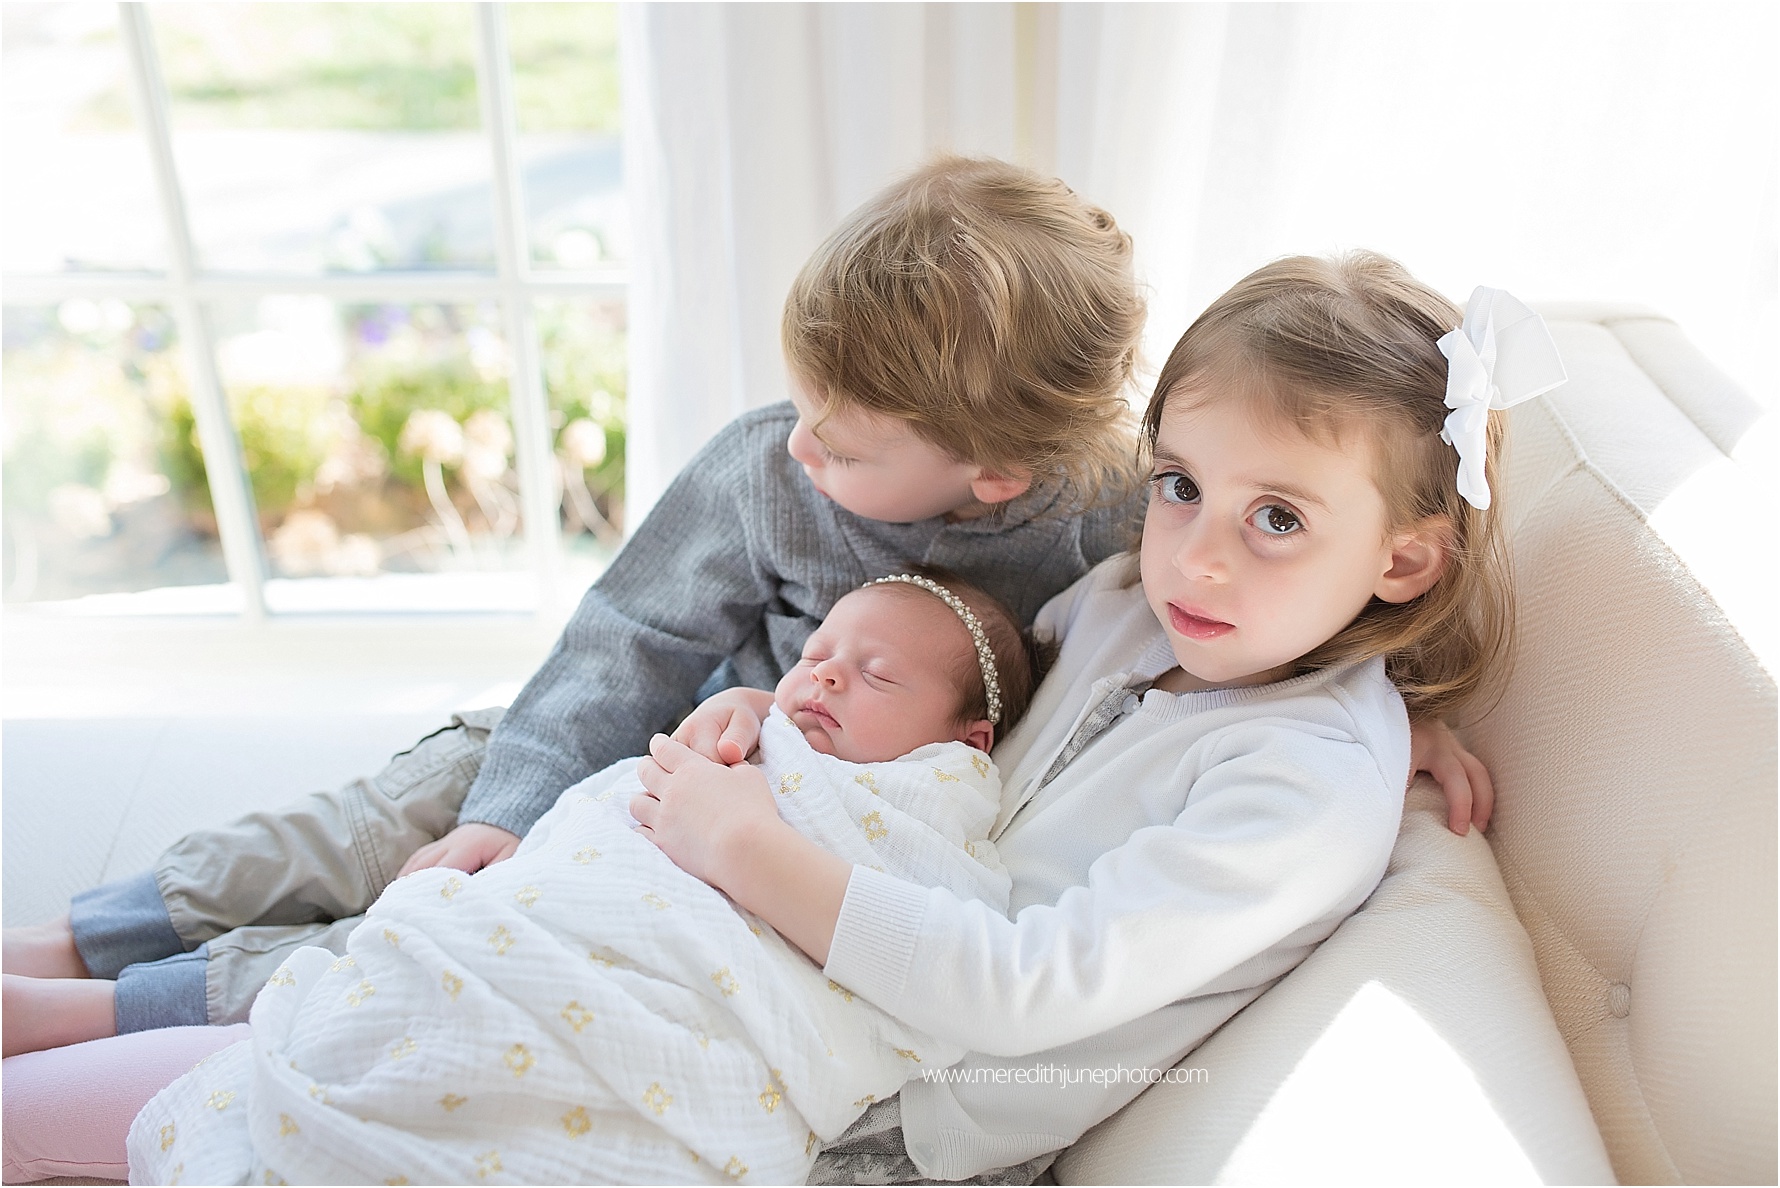 newborn baby with siblings